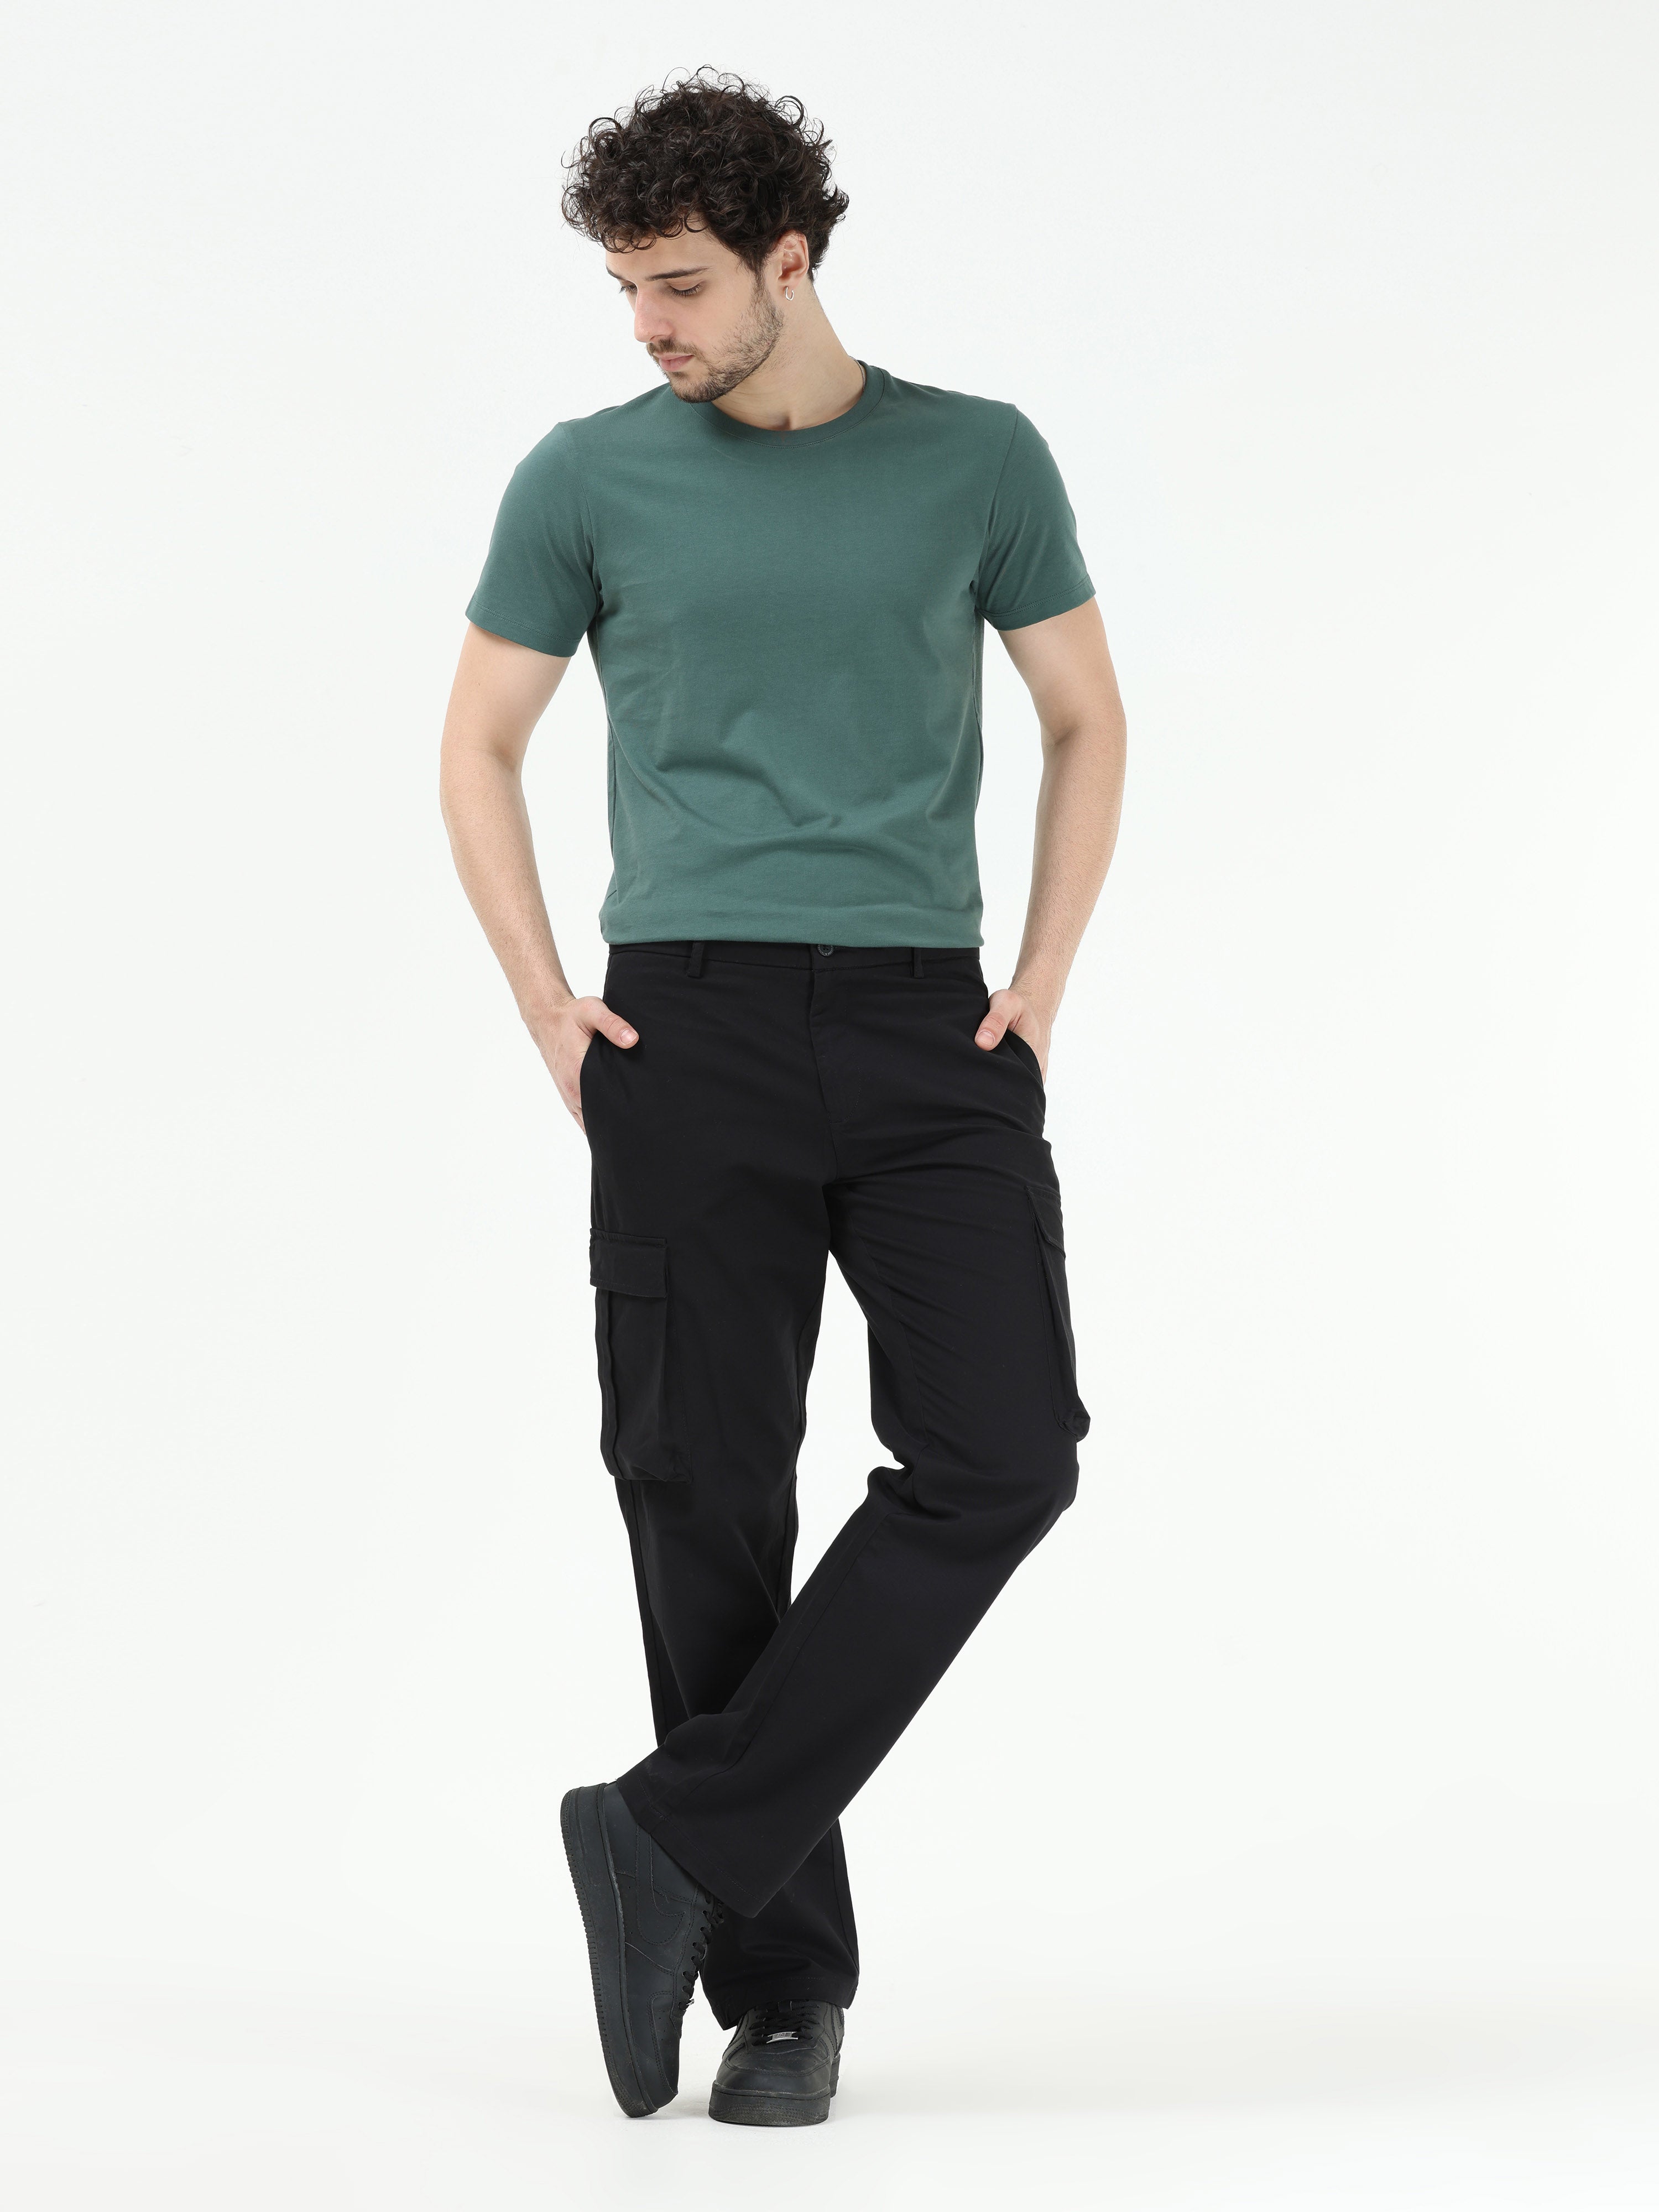 Finest Twill Black Baggy Fit Cargo